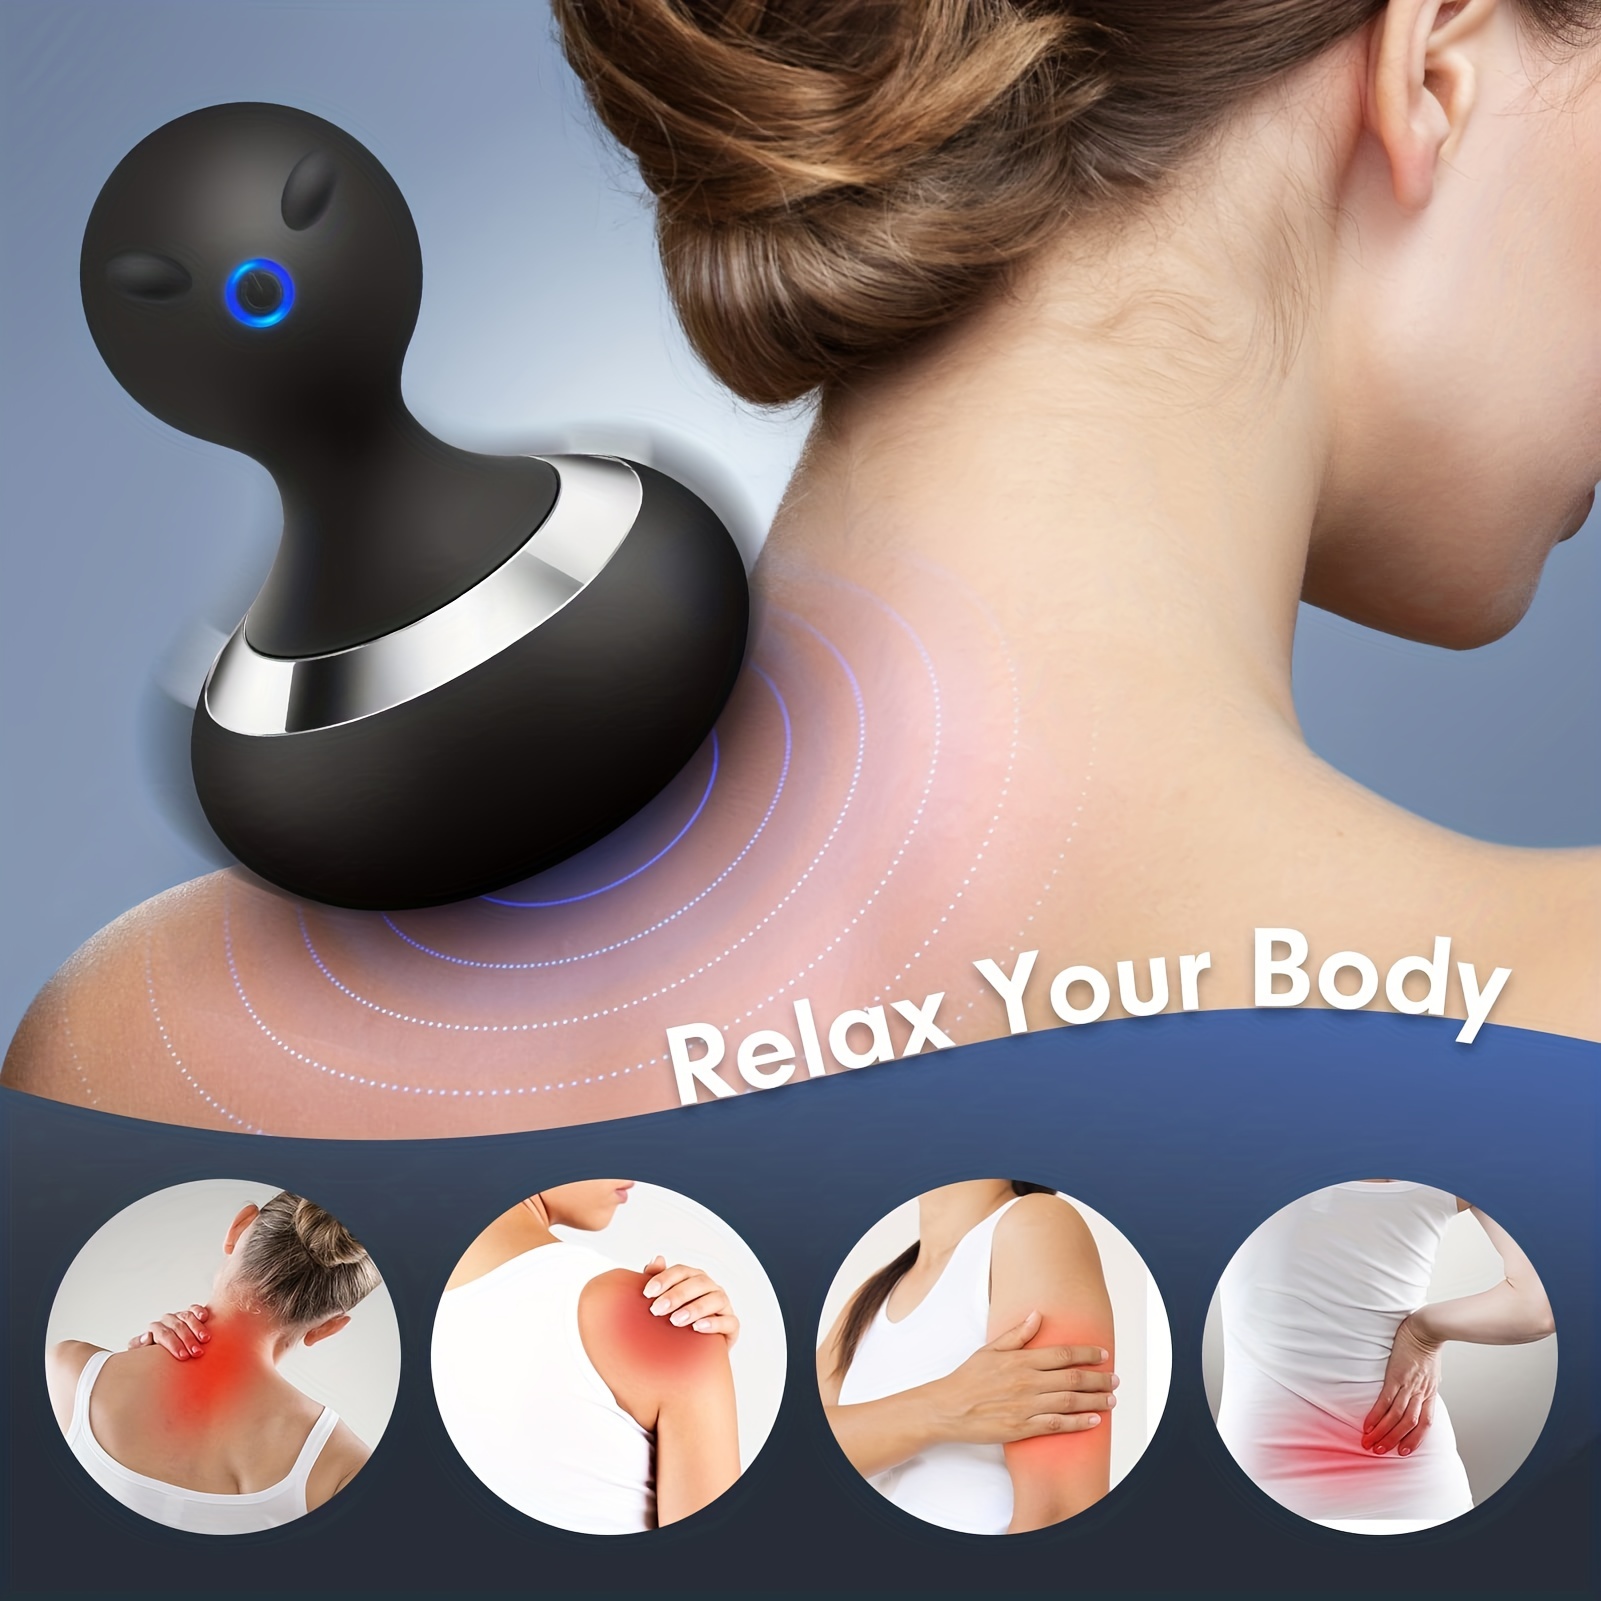 rechargeable handheld neck massager 10 powerful vibrations for ultimate relaxation